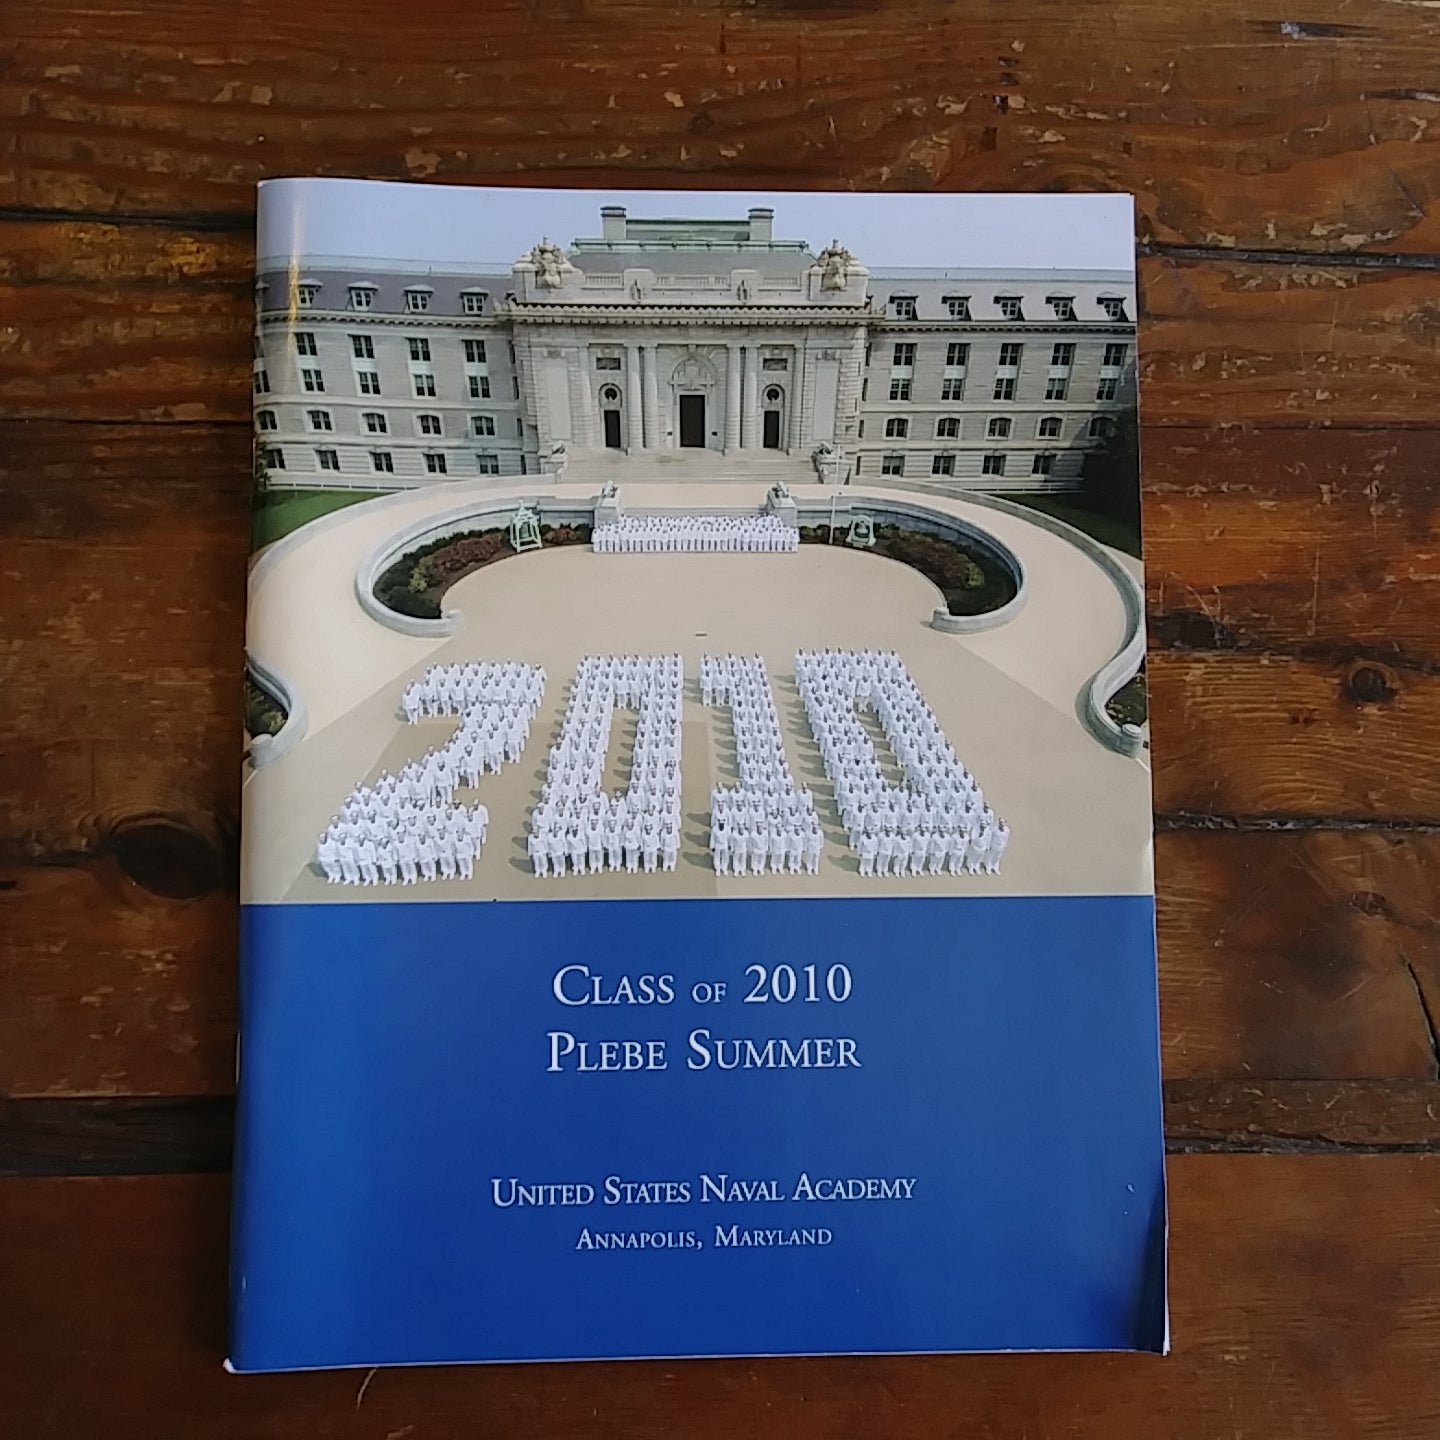 Book, "Class of 2010 Plebe Summer - United States Naval Academy, Annapolis, Maryland"